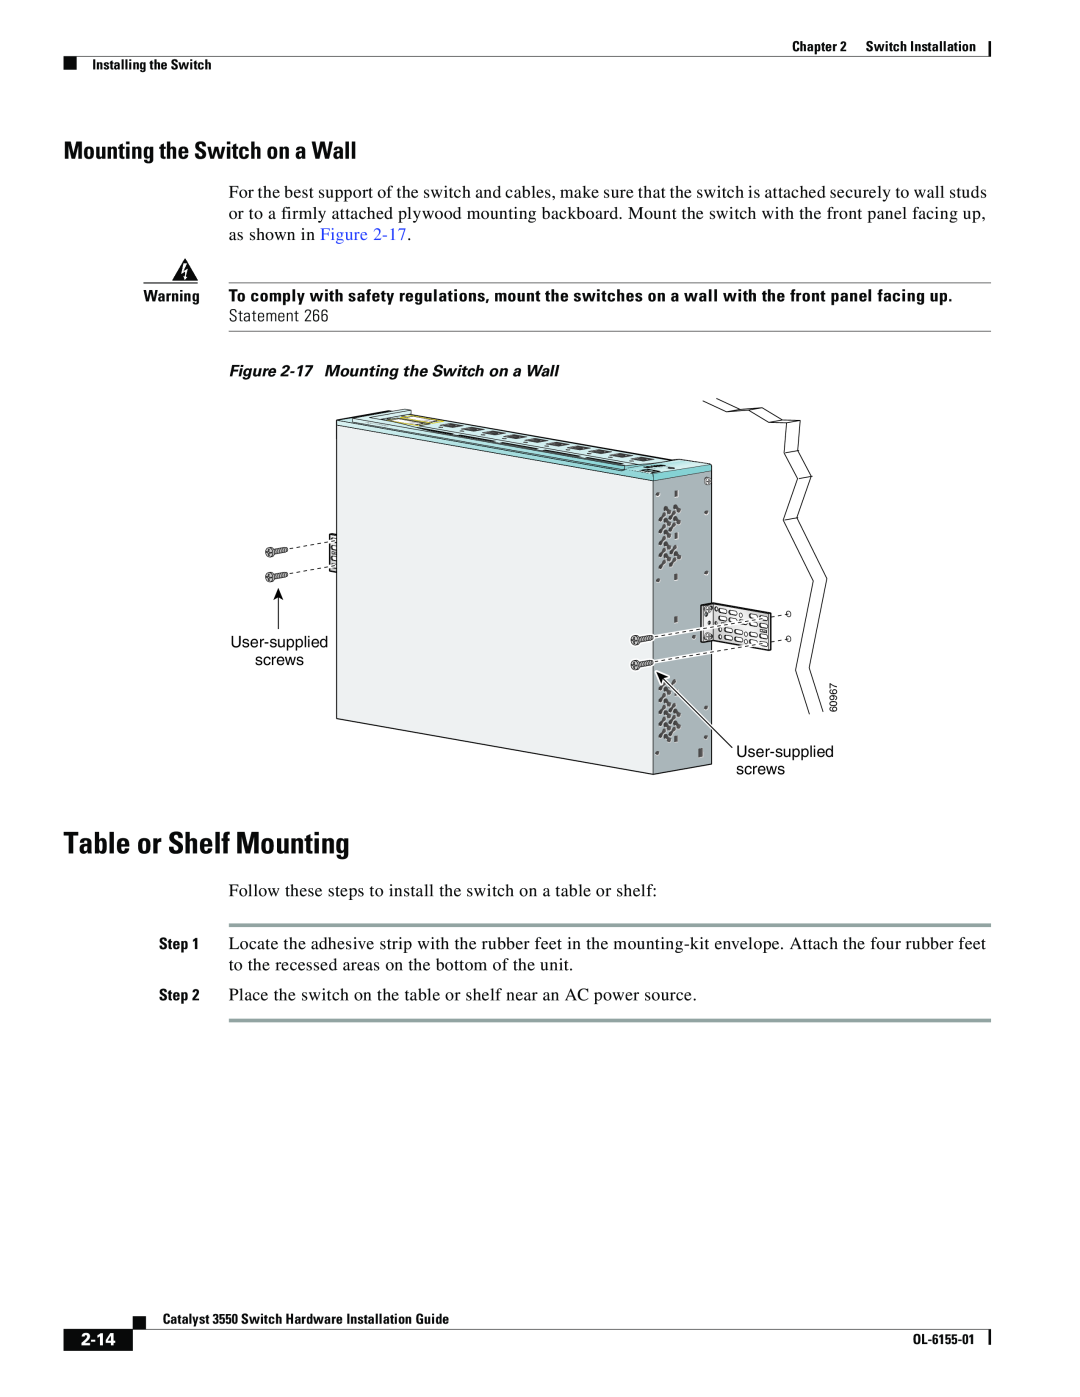 Cisco Systems 3550 manual Table or Shelf Mounting, Mounting the Switch on a Wall, 2-14 